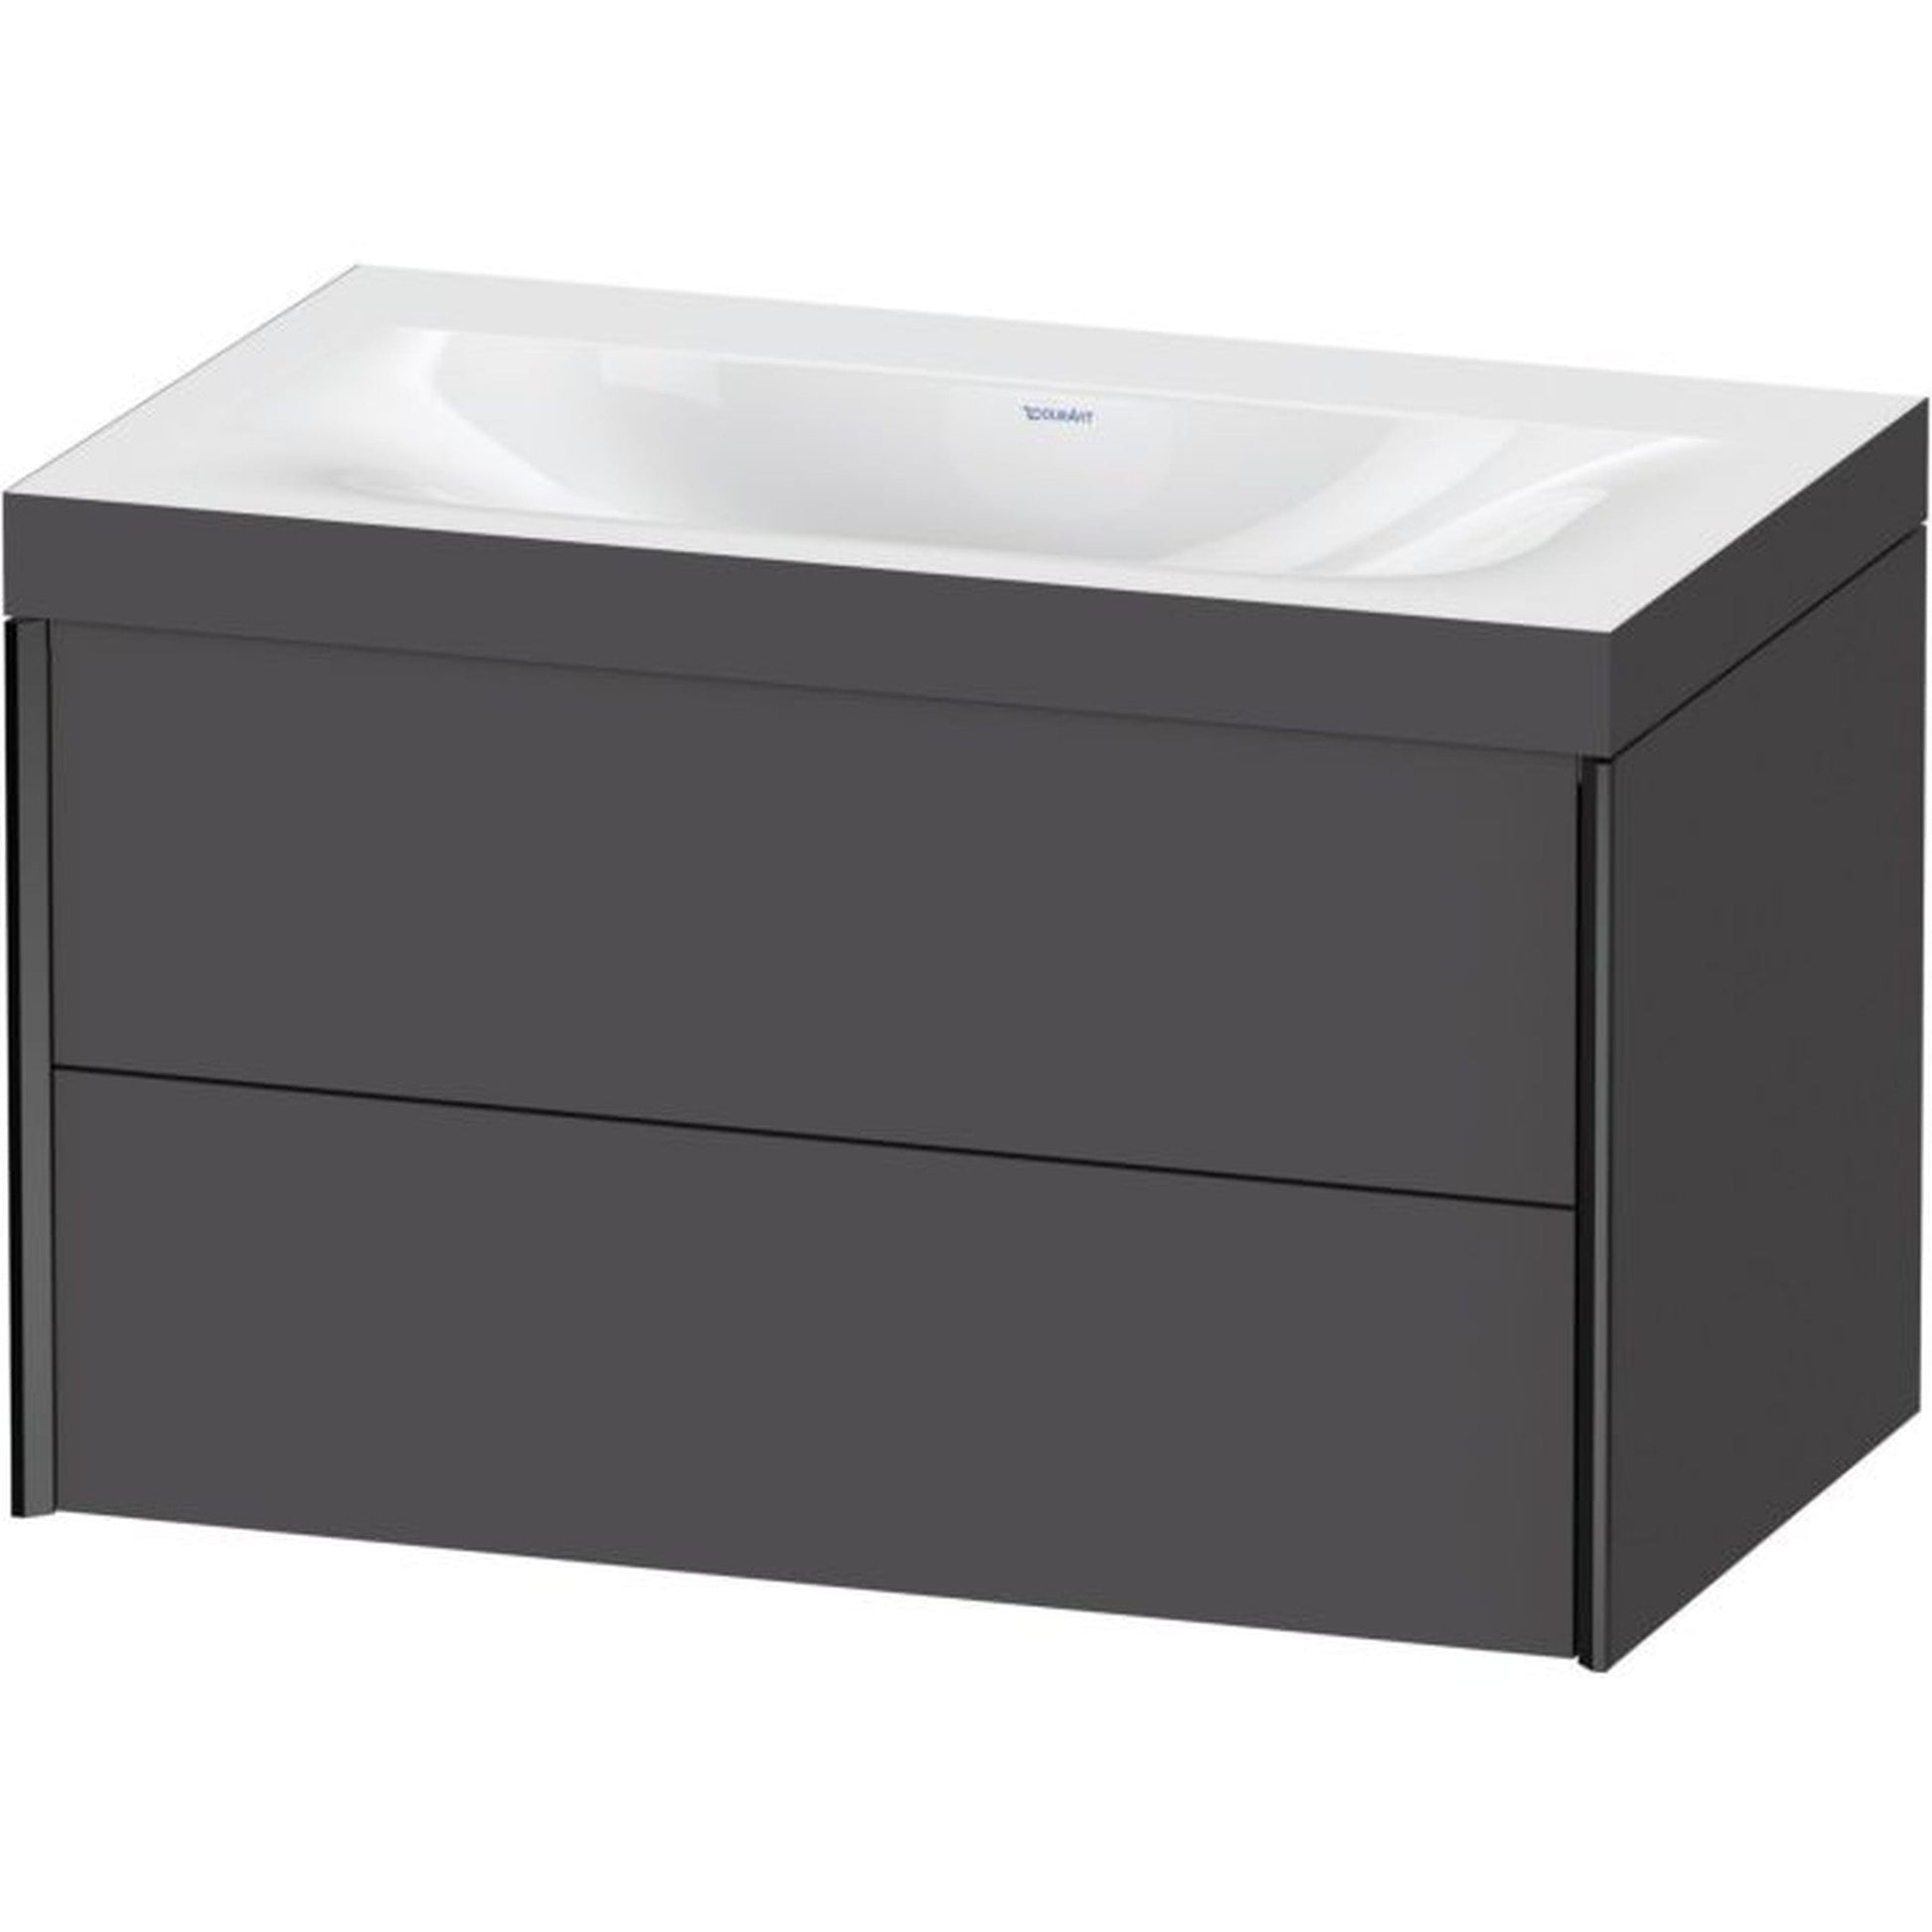 Duravit Xviu 31" x 20" x 19" Two Drawer C-Bonded Wall-Mount Vanity Kit Without Tap Hole, Graphite (XV4615NB249C)